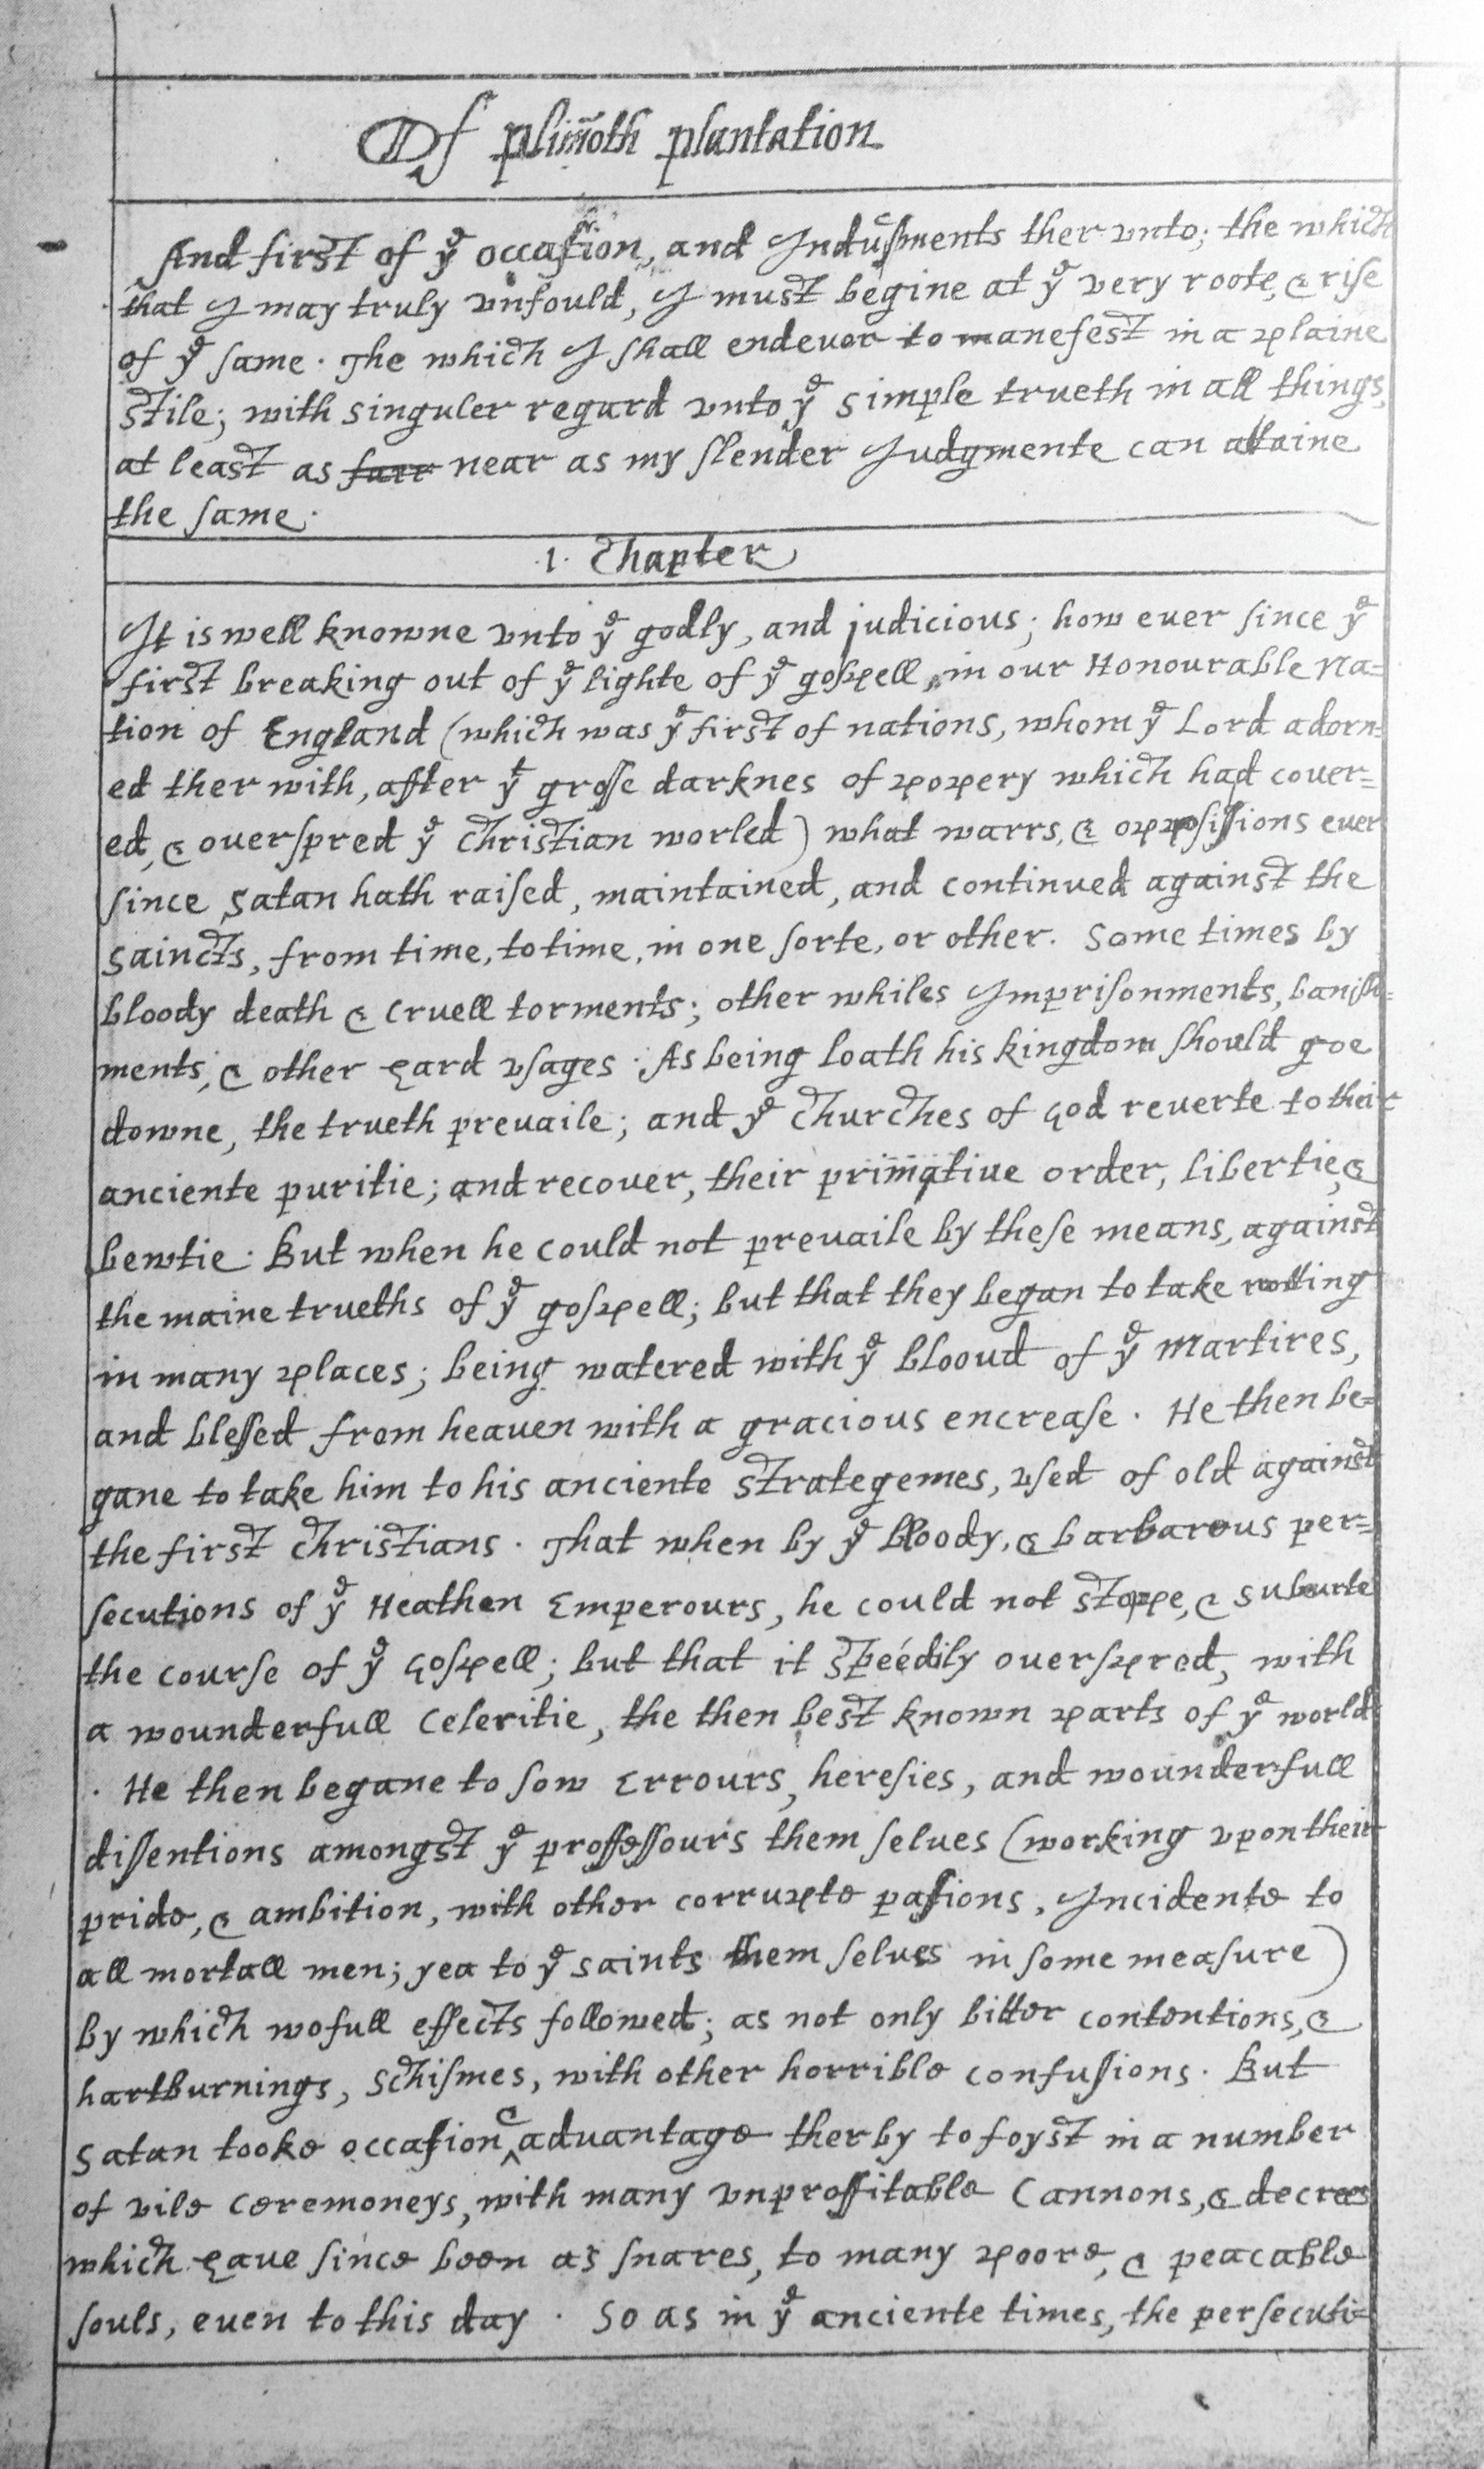 The first page of William Bradford's journal; it was his memoirs which confirmed turkey being served at the first Thanksgiving.